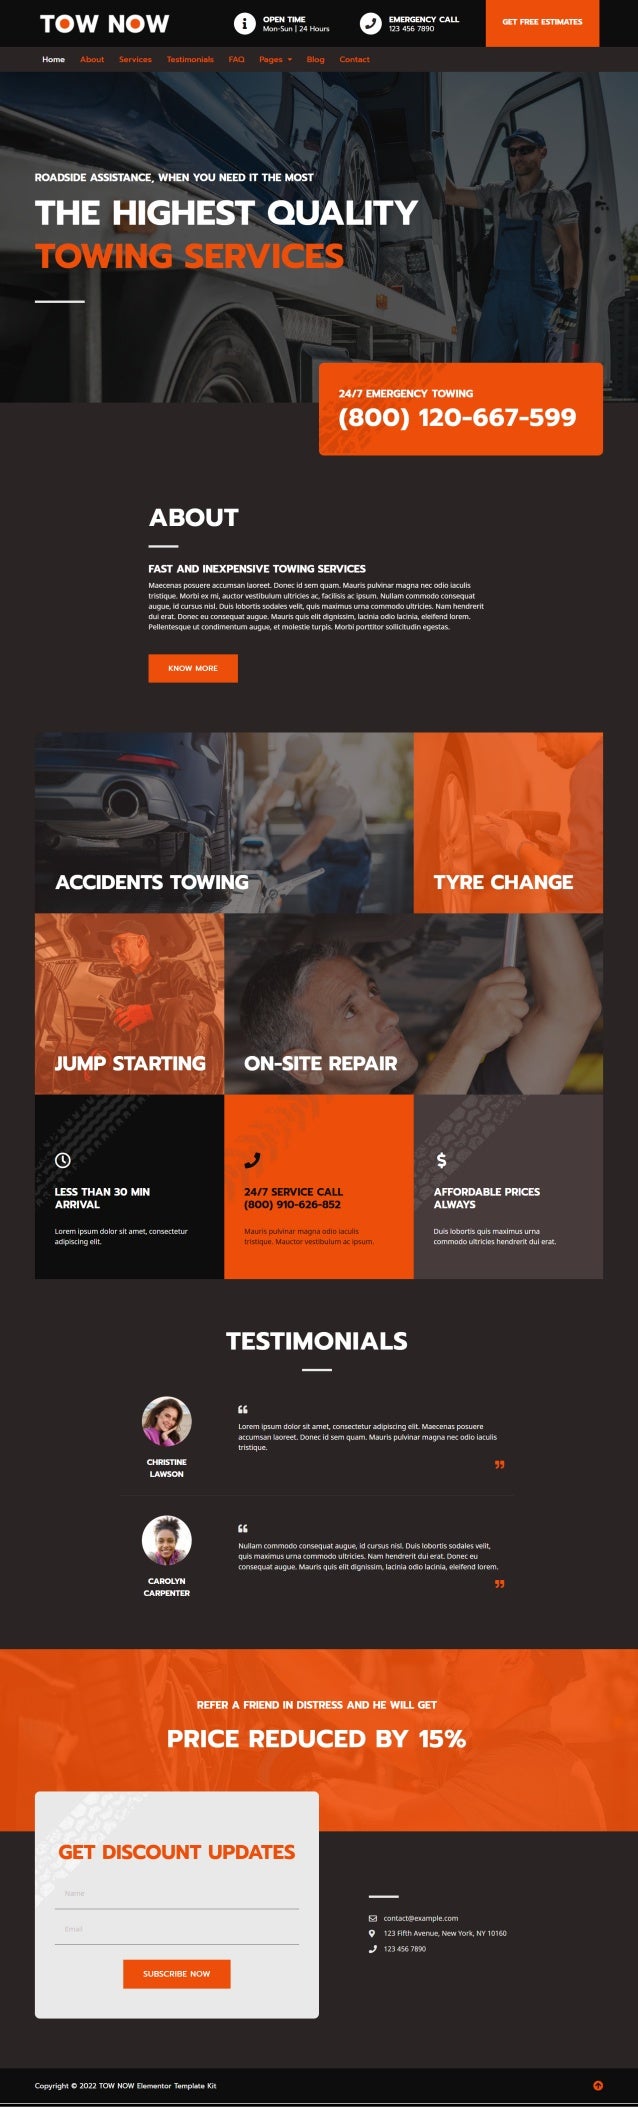 Towing Service Website Landing Page Design With Wordpress Elementor - ⭐ON SALE⭐